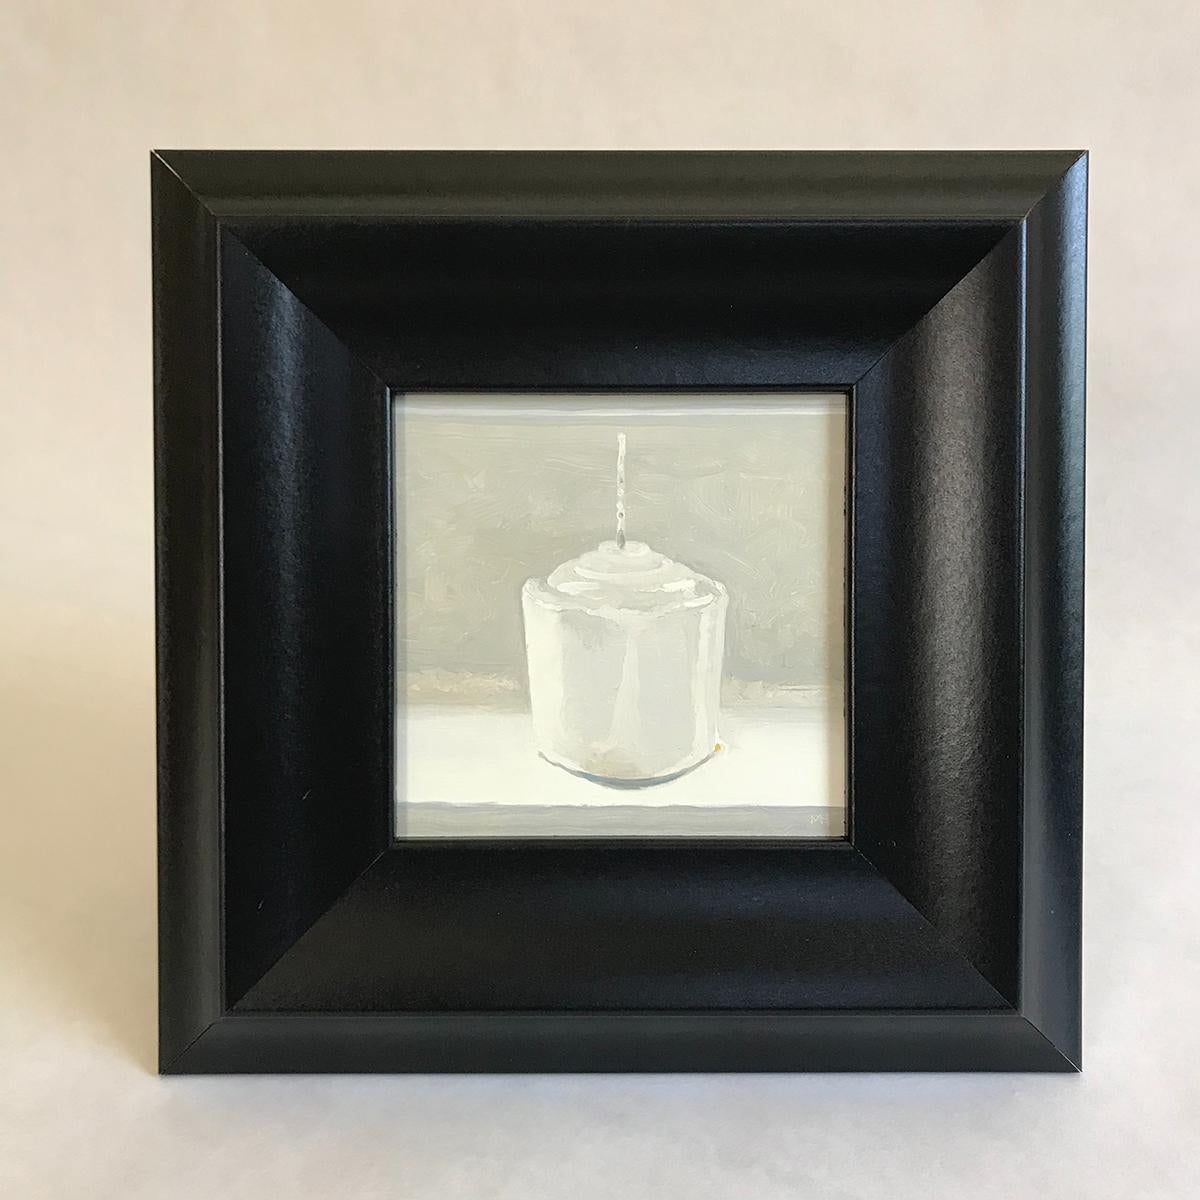 Small, still life painting on panel of a simple white candle with a black frame
oil on panel
5 x 5 inches unframed
9.5 x 9.5 inches framed

As part of his 